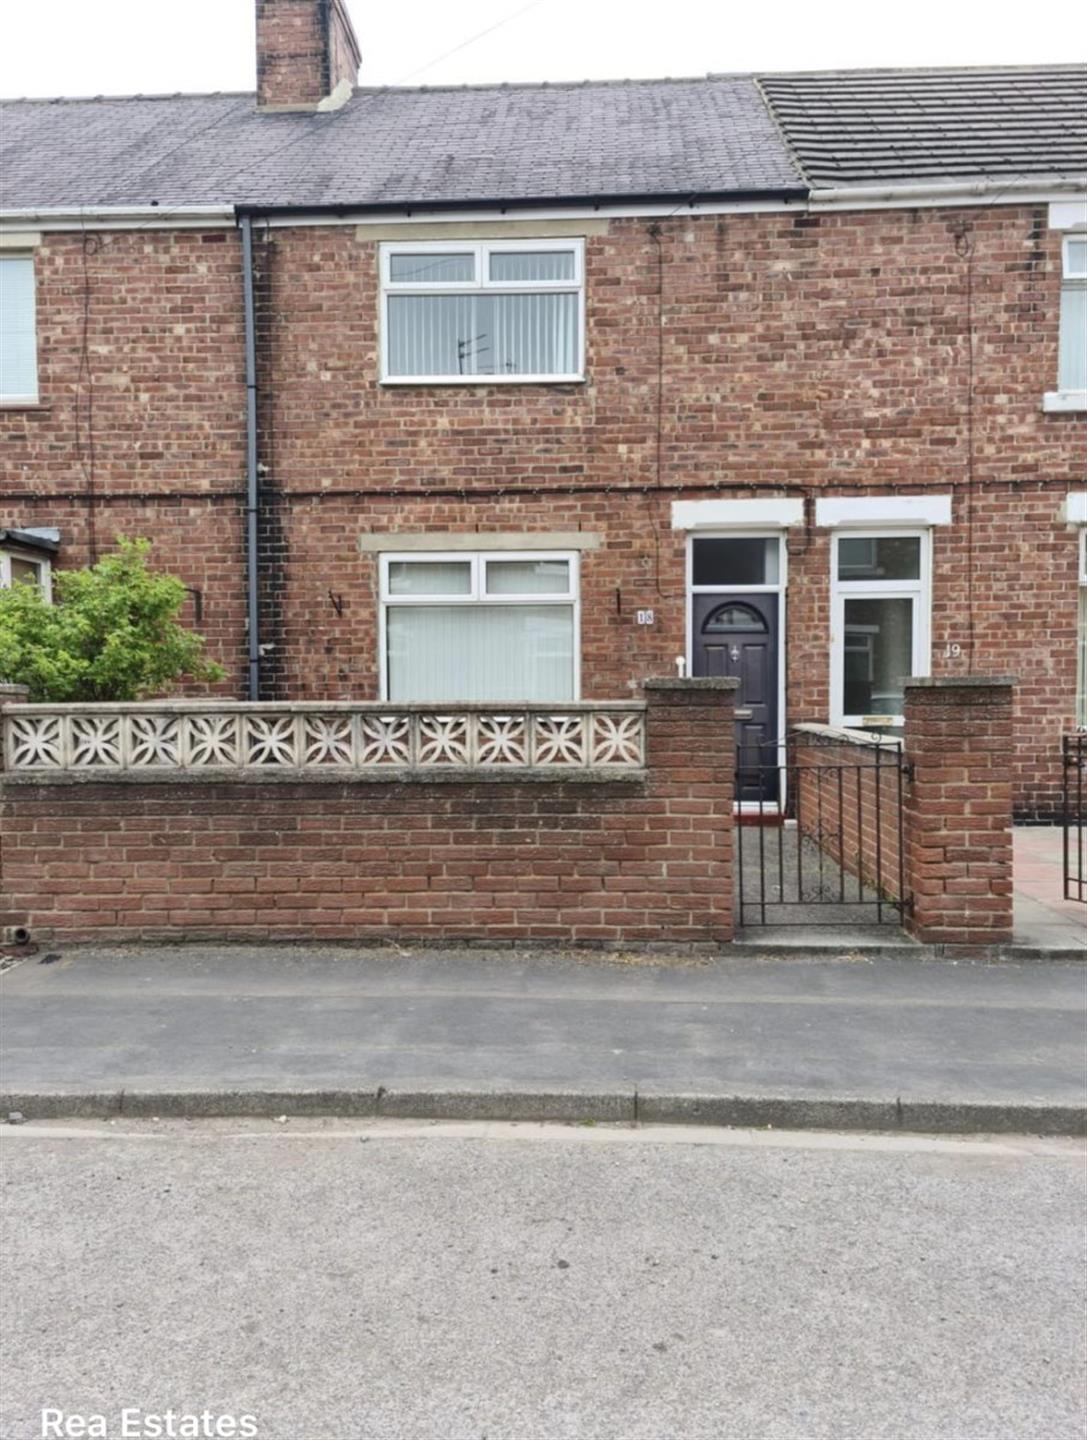 2 bedroom terraced house Let Agreed in Saint Helens - Main Image.